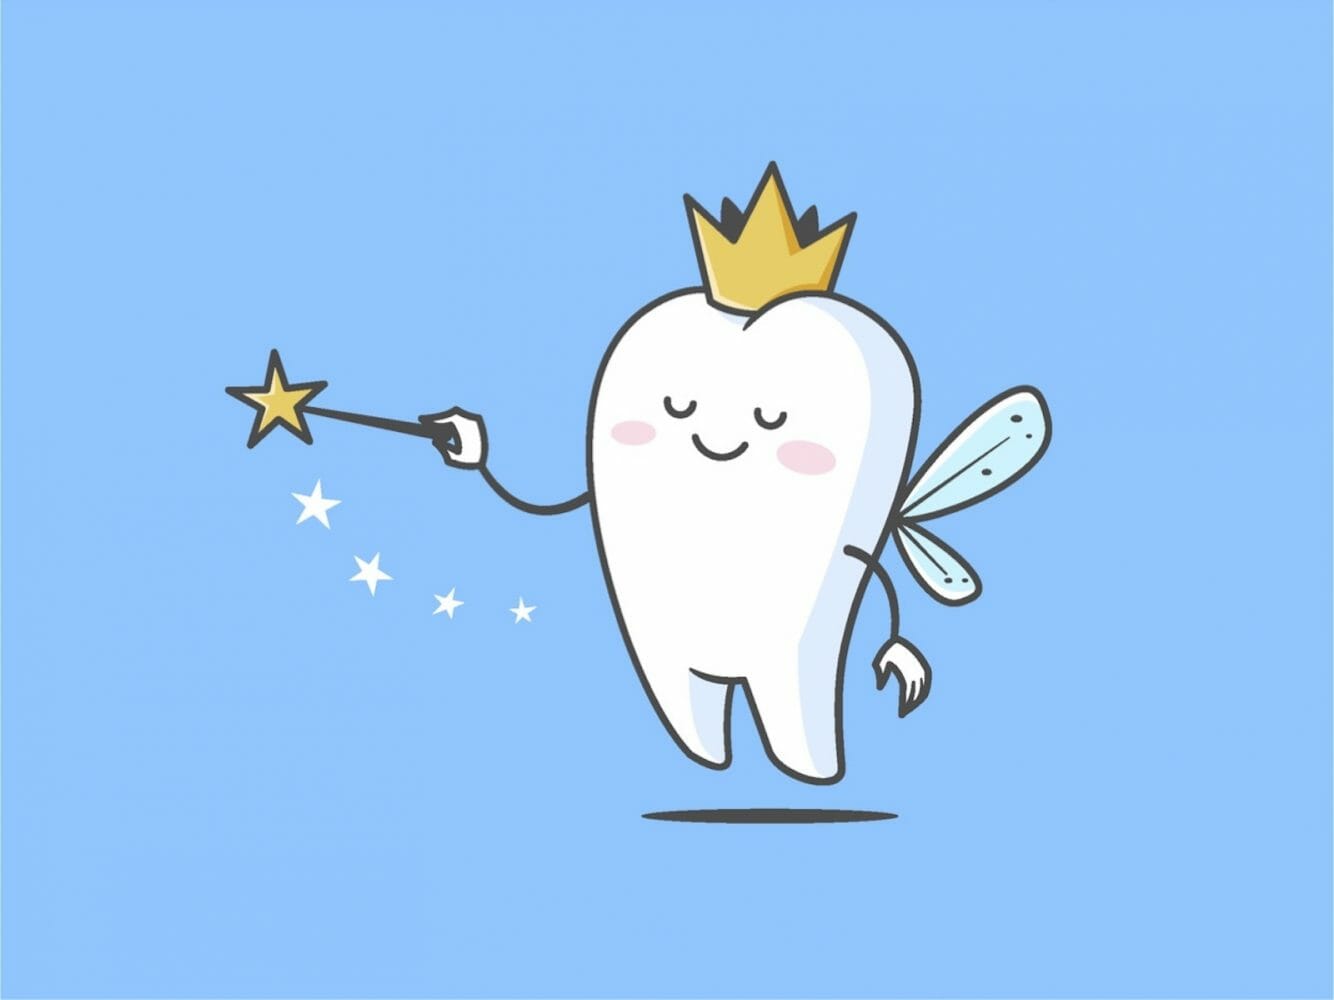 Where Did The Tooth Fairy Come From?